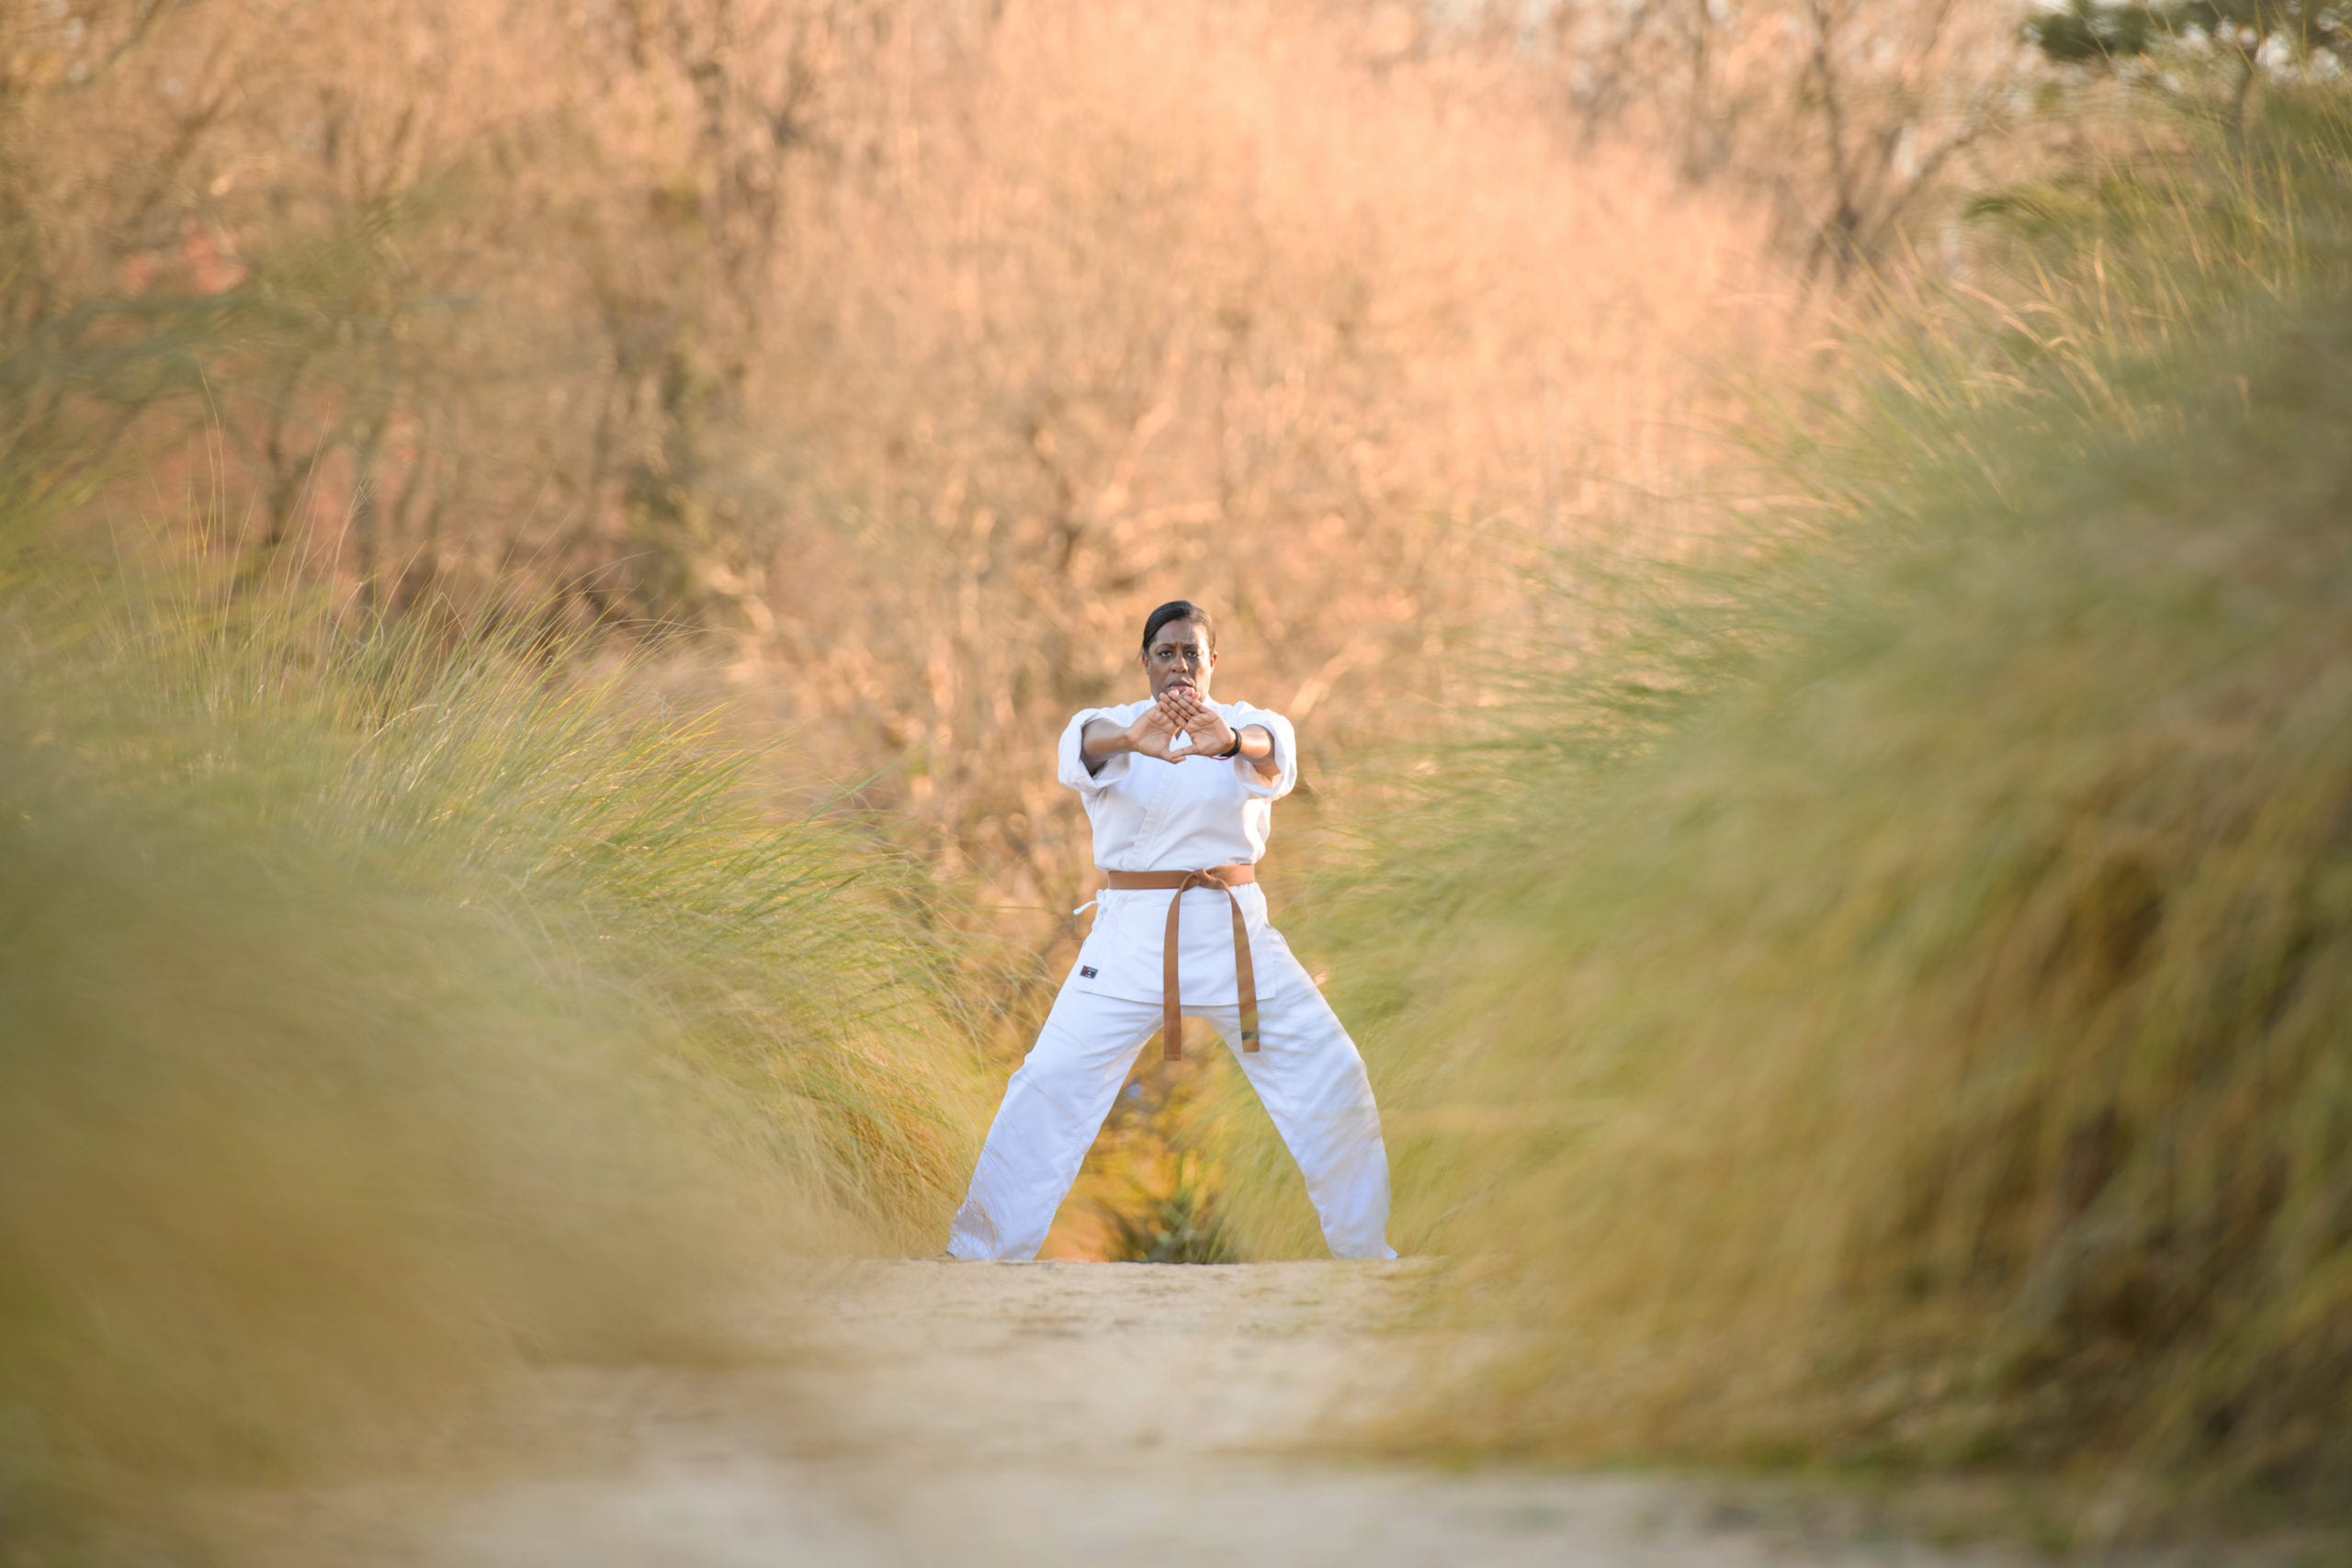 Birma Gainor, interim director of Counseling and Psychological Services (CAPS) for Clemson’s Student Health Services in the Division of Student Affairs, in a martial arts stance